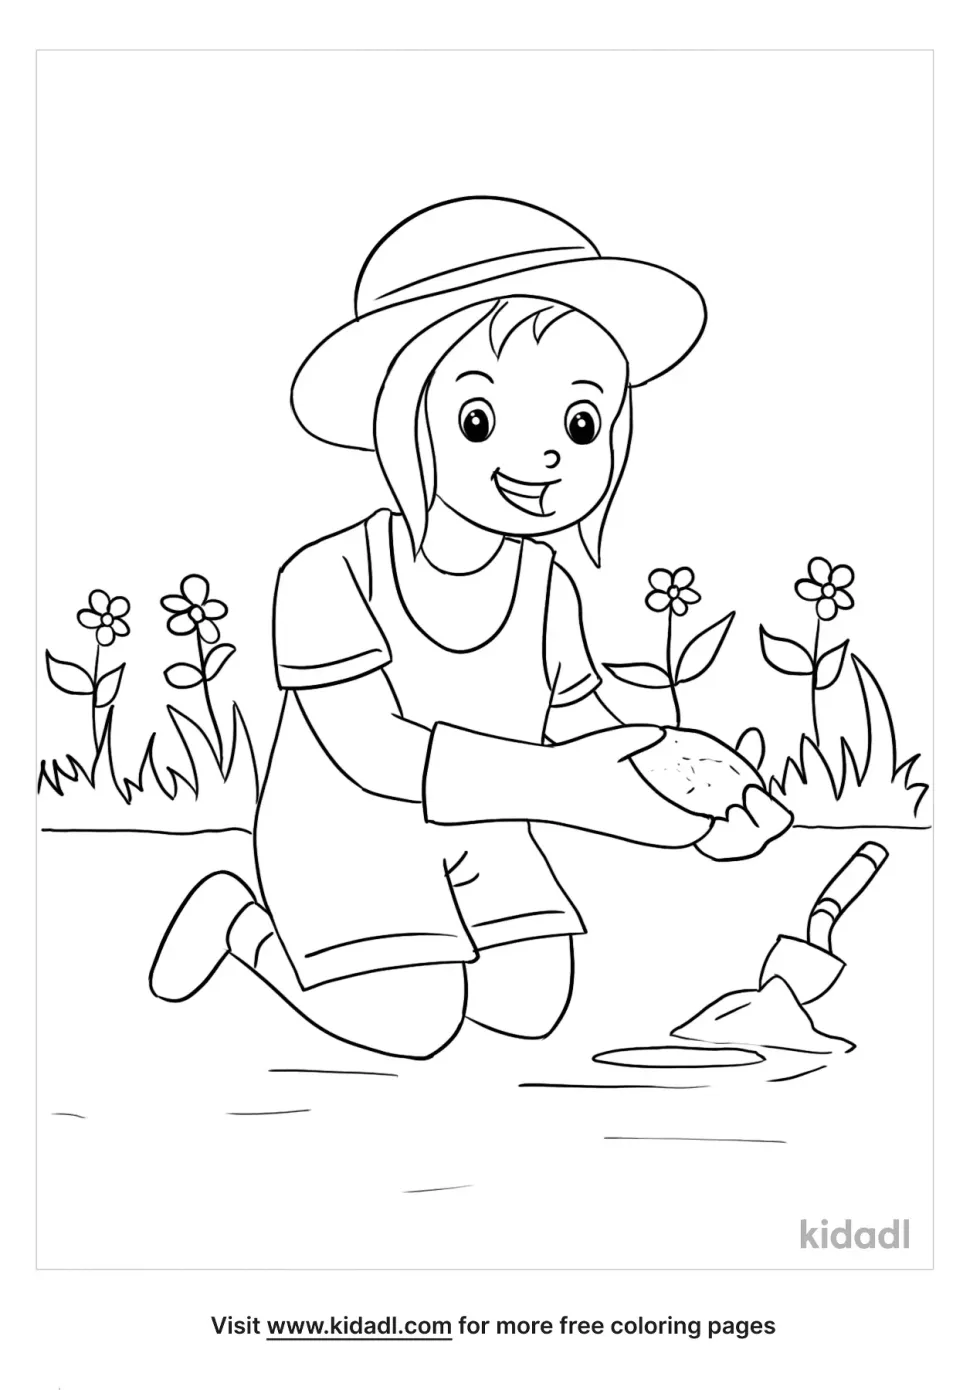 Planting A Garden Coloring Page